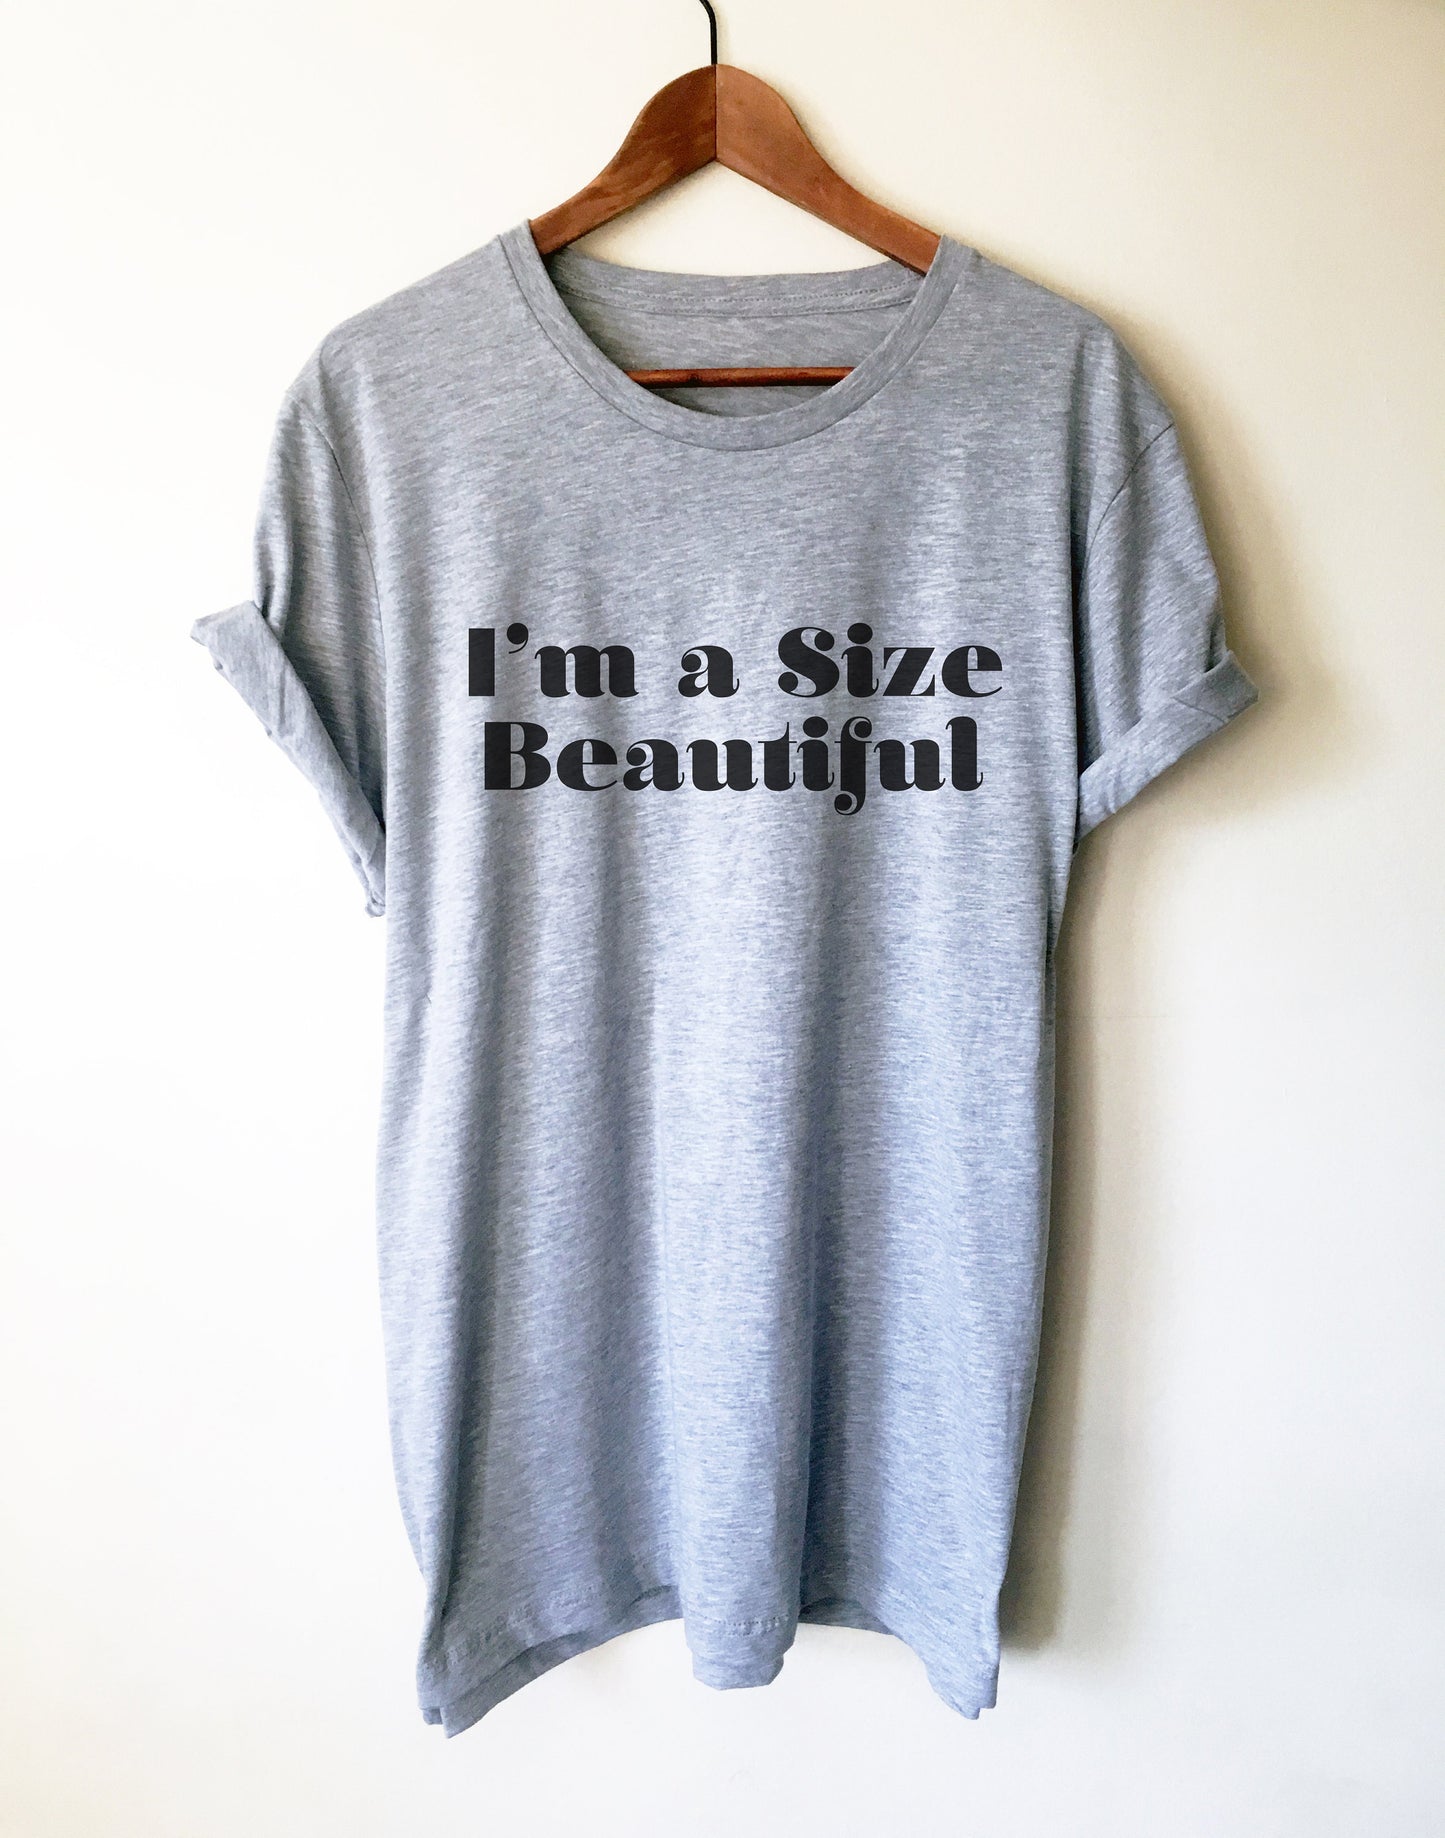 I’m A Size Beautiful Unisex Shirt - Curvy Girl Shirt, Curvy Girl Gift, Girl Power Shirt, Feminist Shirt, Thick Thighs Shirt, Curved Hips